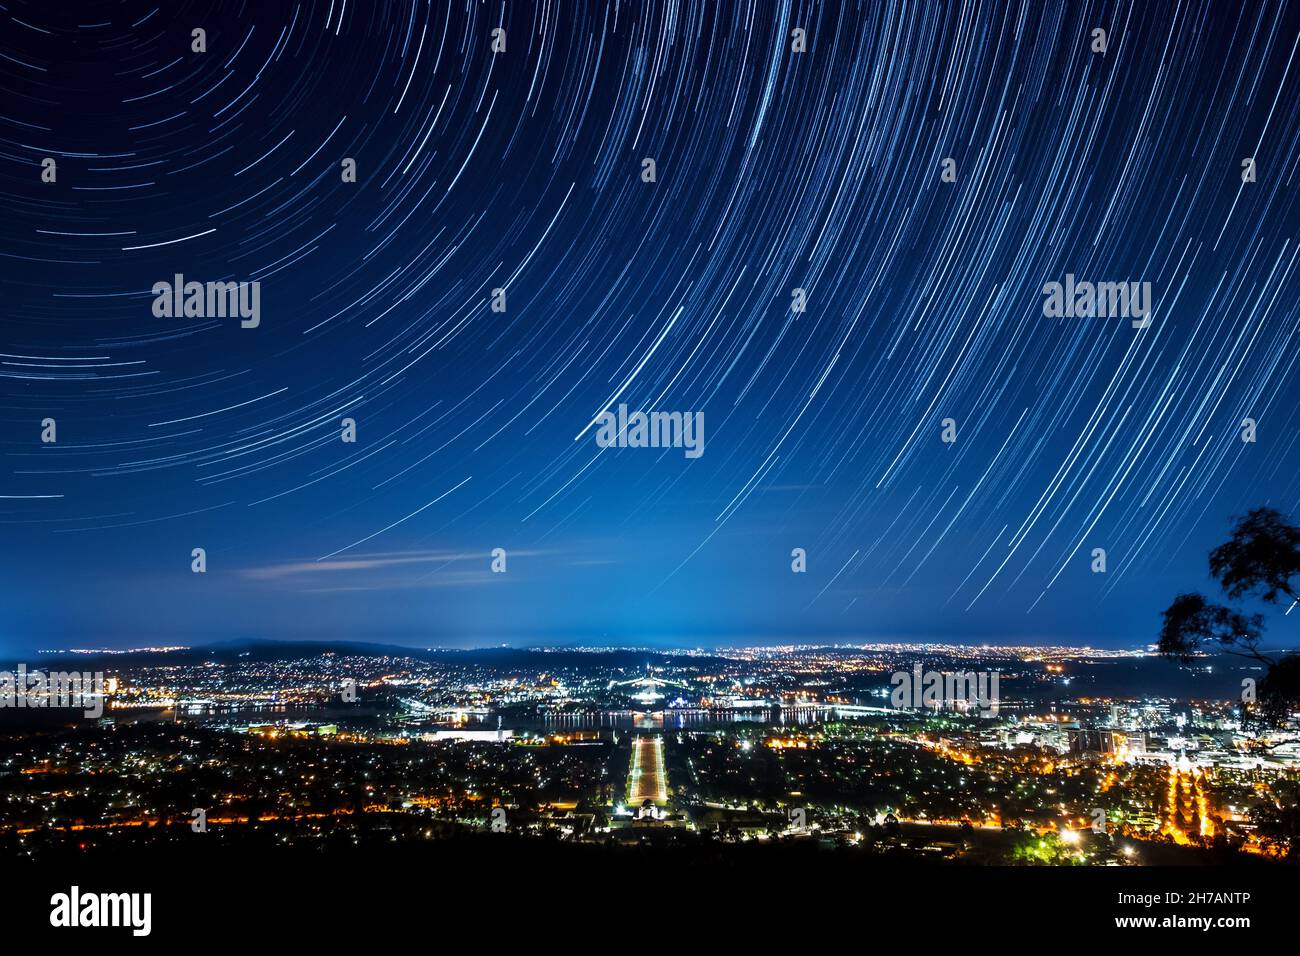 Star trail over Canberra city, ACT Australia Stock Photo